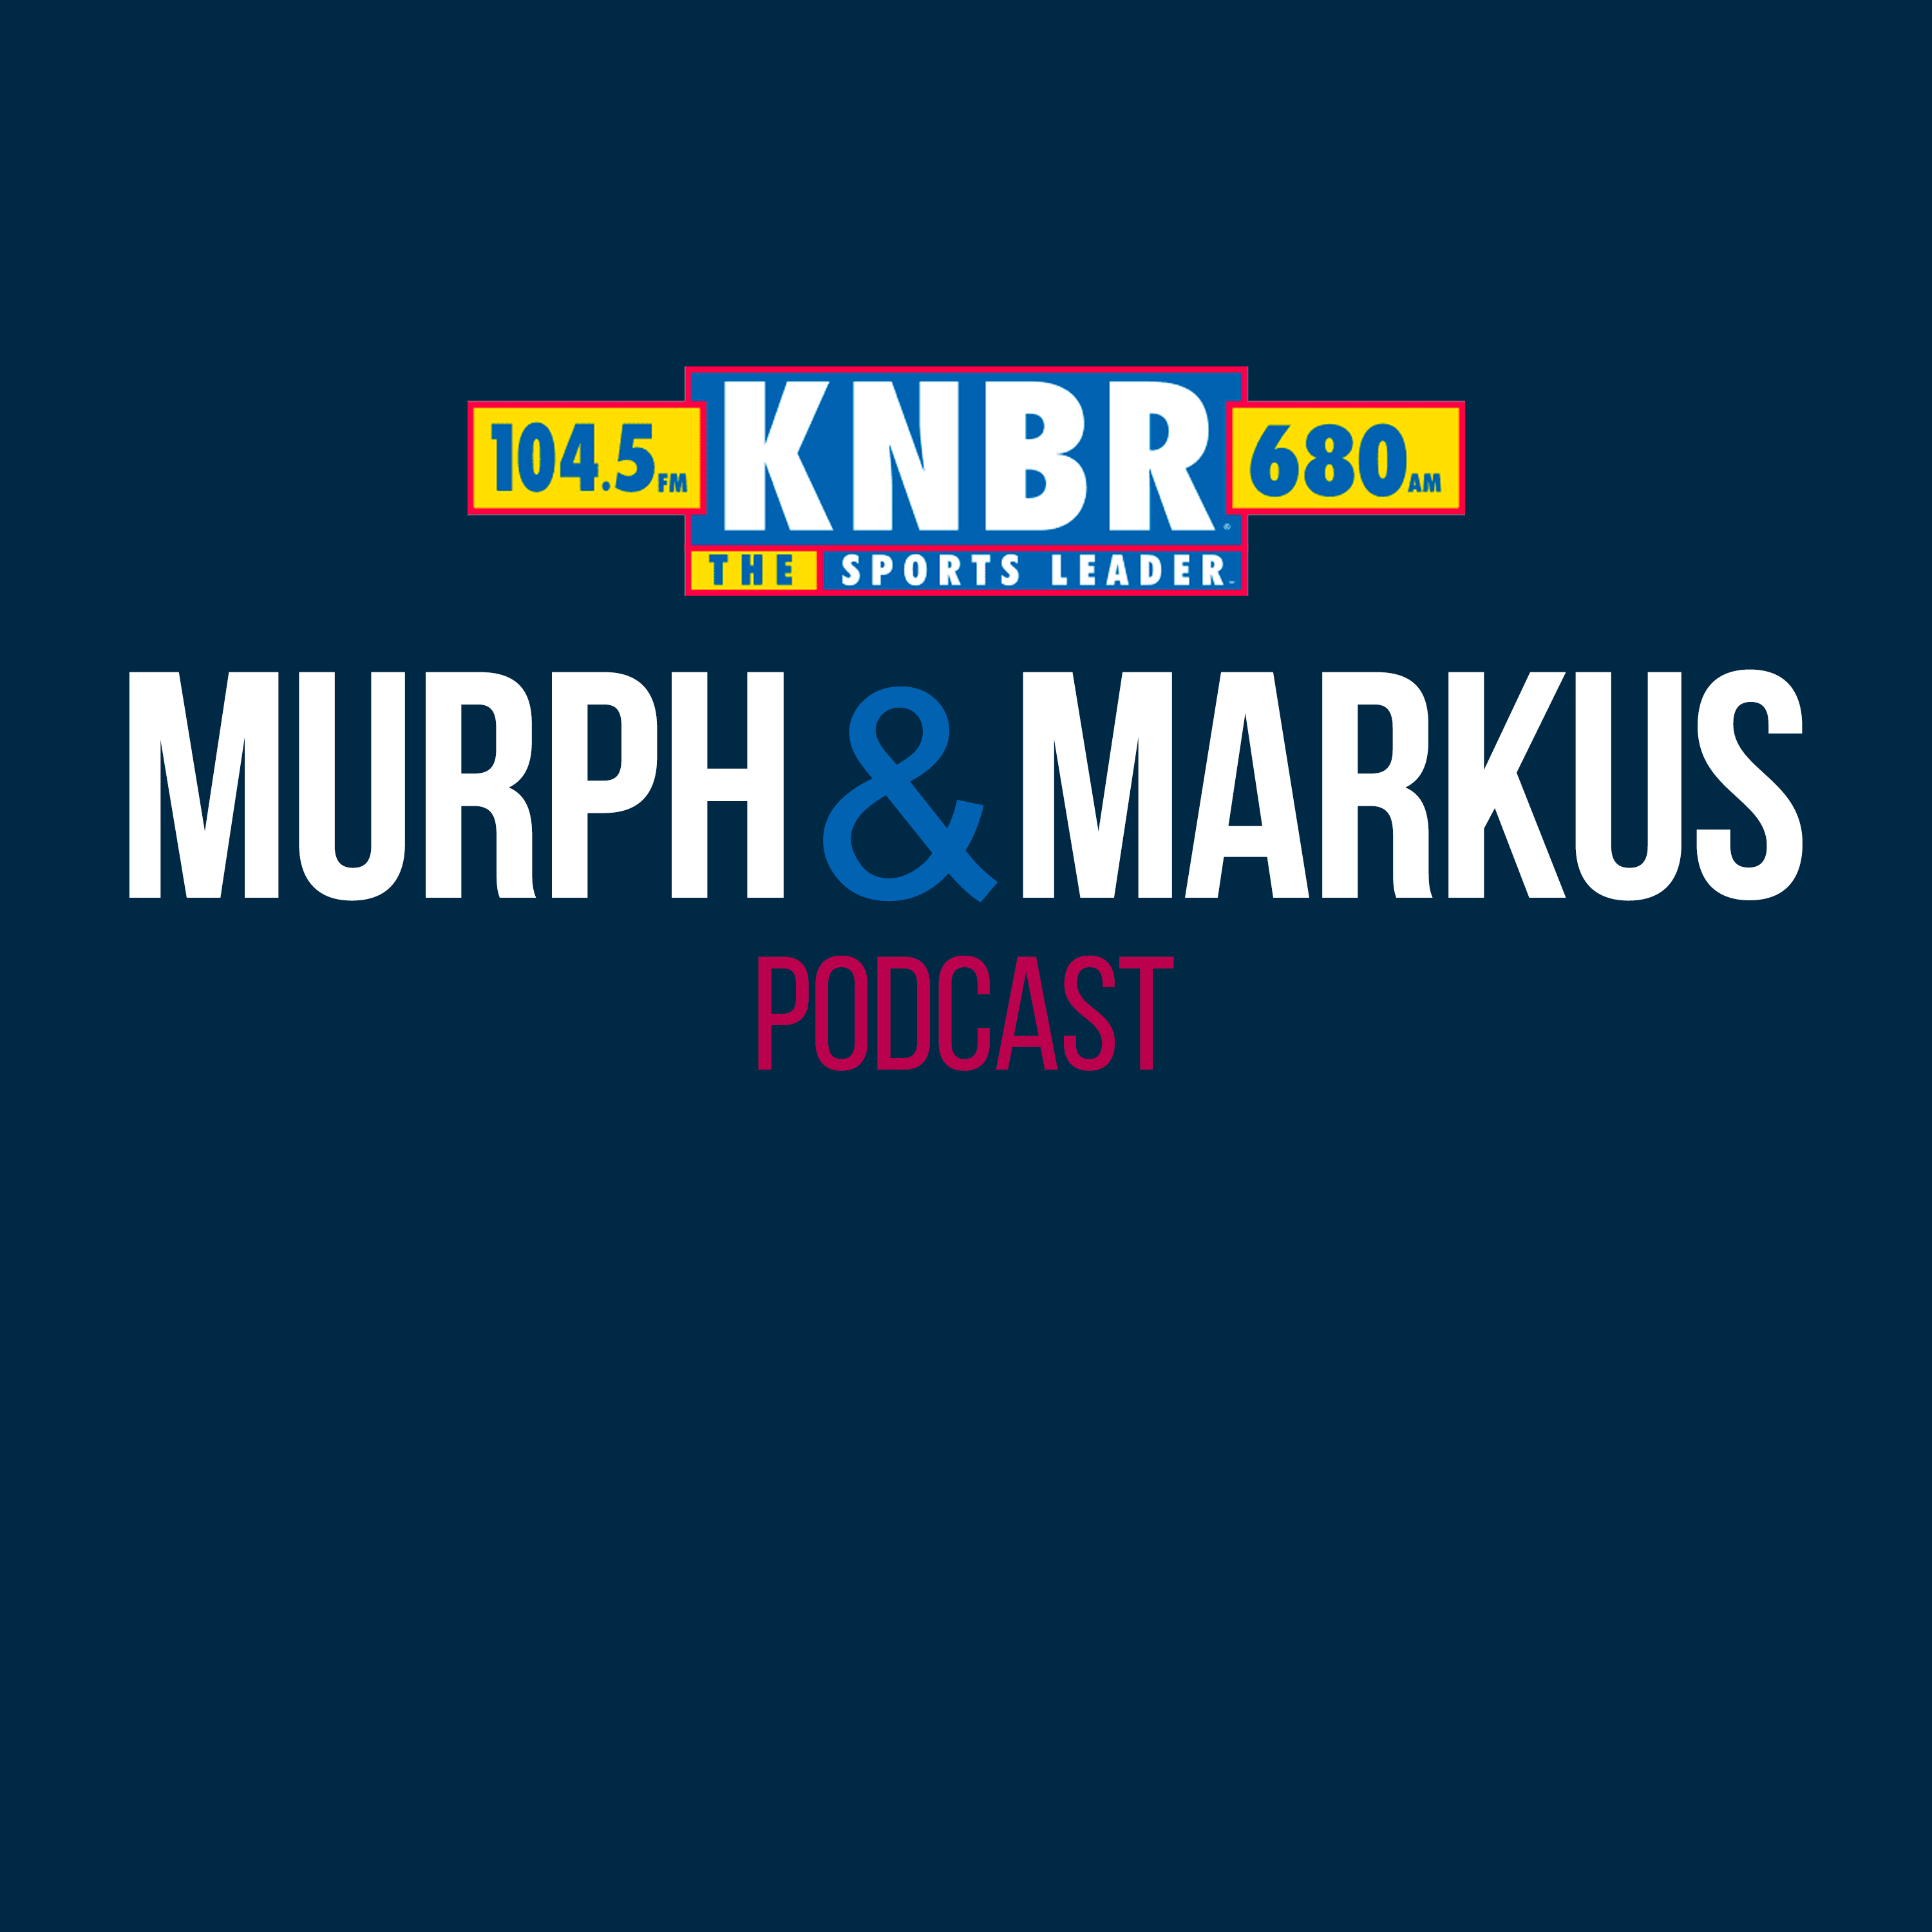 2-26 Dan Graziano joins Murph & Markus to give his perspective on the increased salary cap in the NFL and how it impacts the 49ers next season